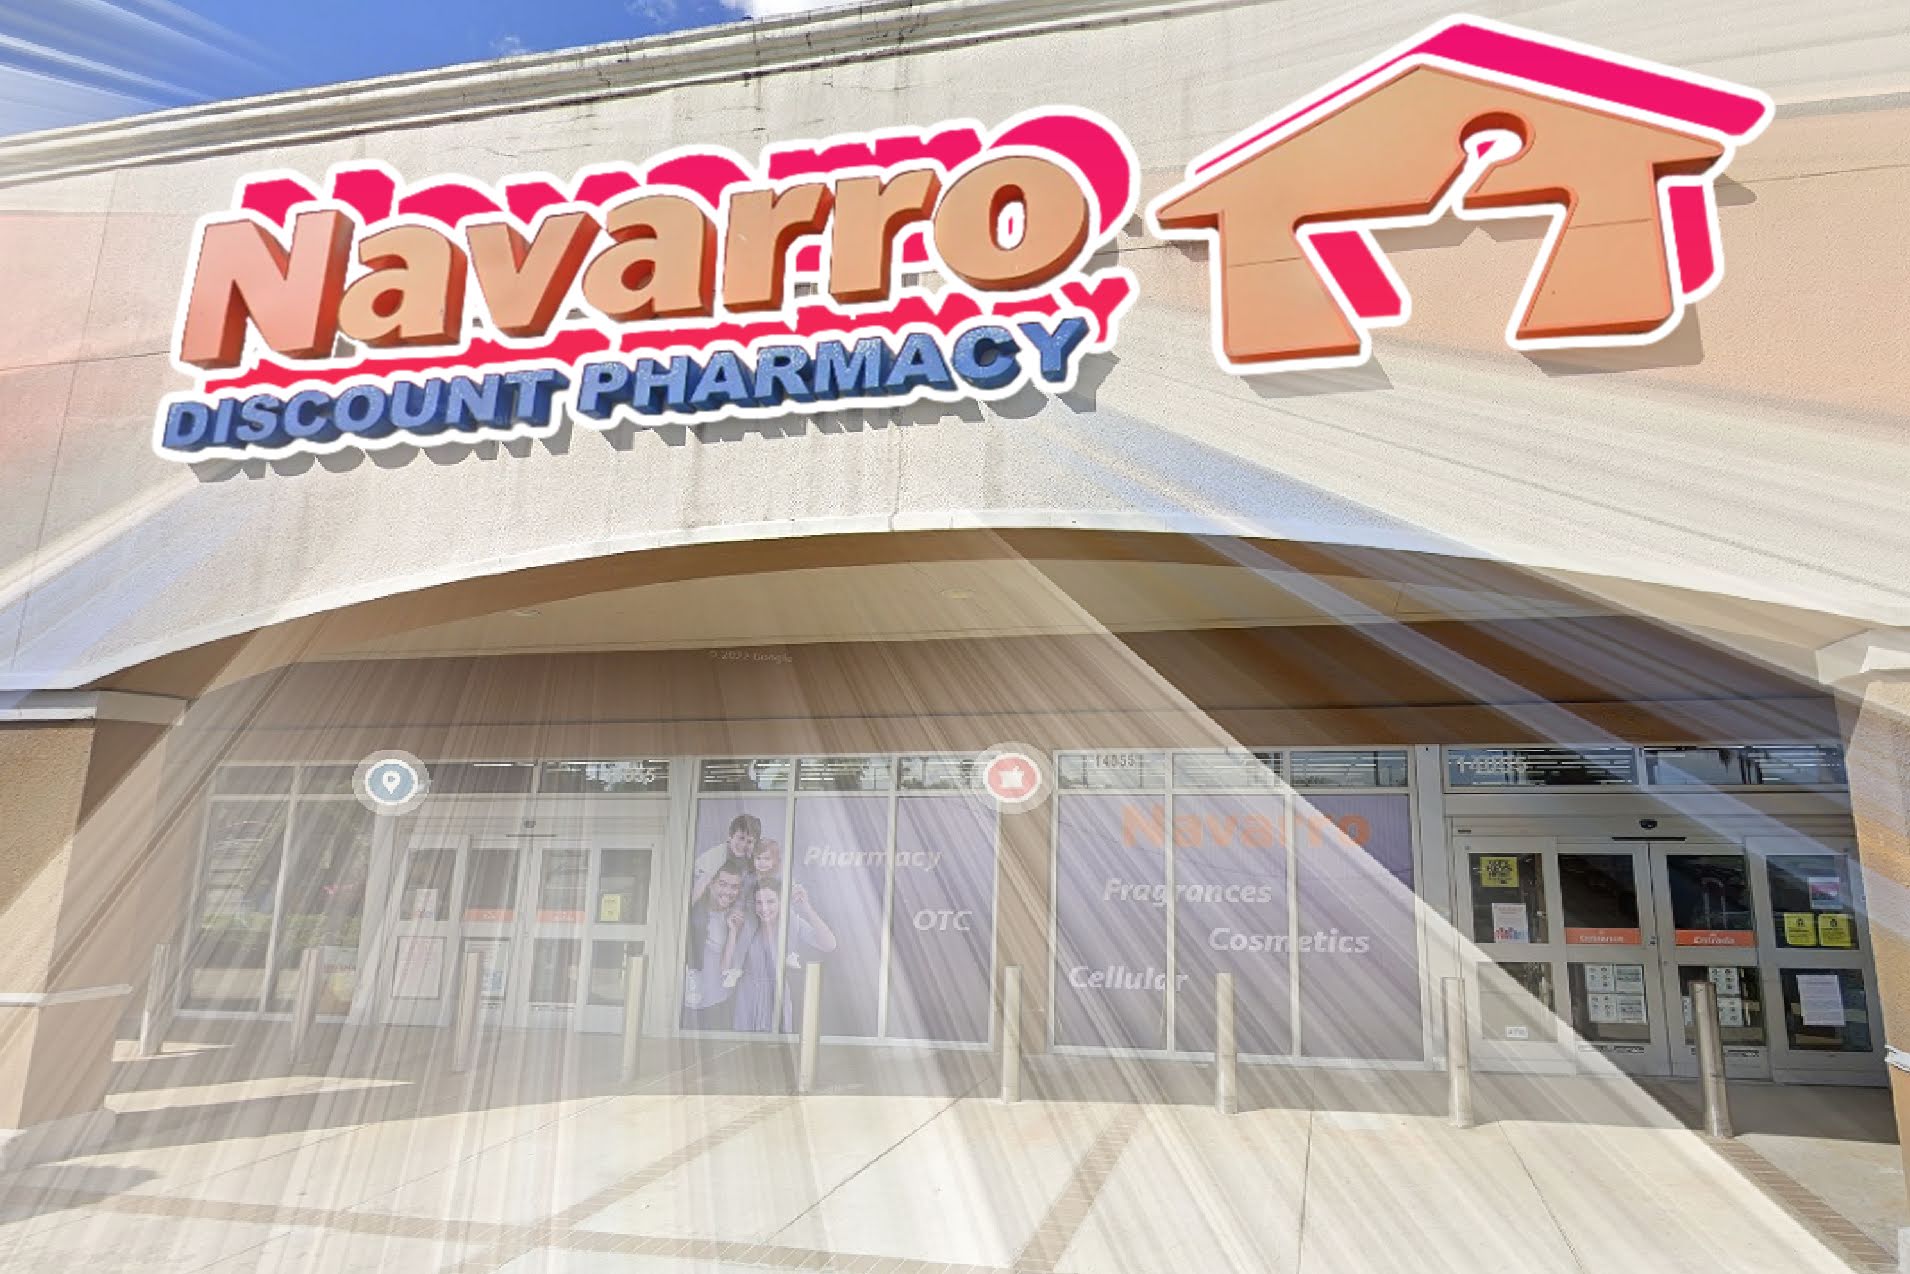 Navarro Discount Pharmacy Holds Great Significance to the Latino Community nuestro stories